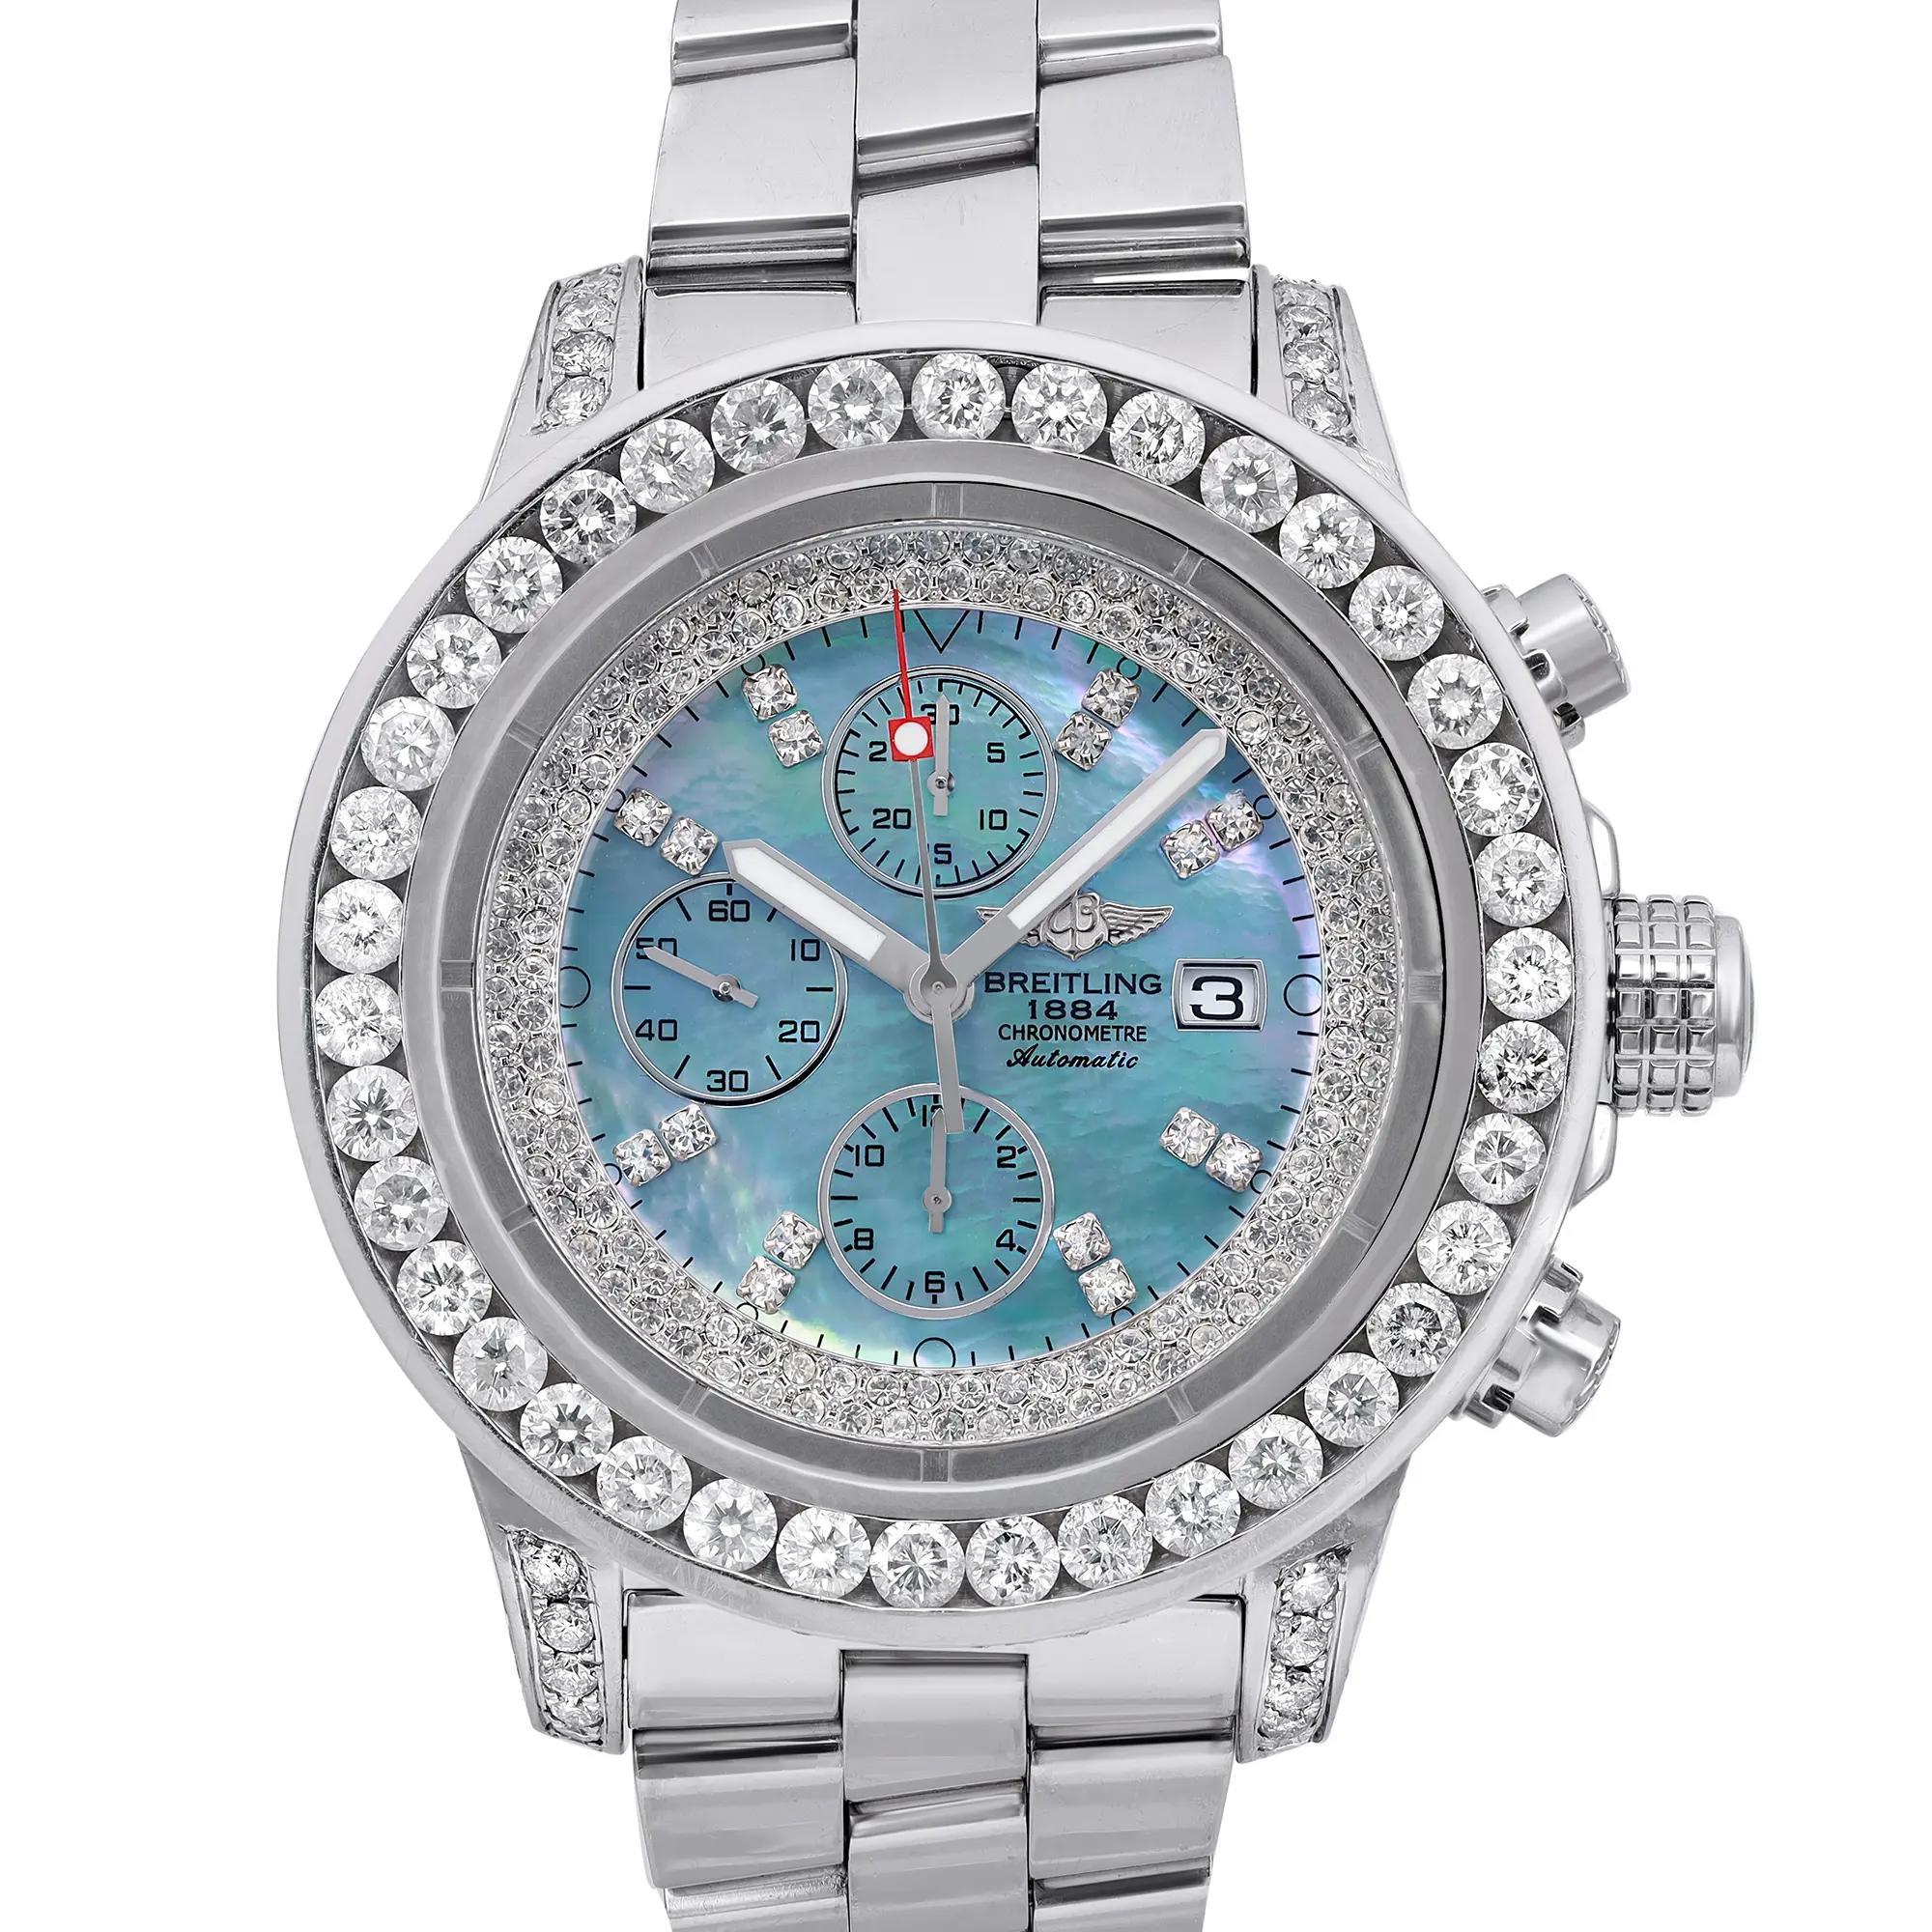 Pre-owned. Custom Cubic zirconia inner bezel. 7.6-carat diamond bezel and approx 2.5-carat diamonds on sides.  Total approx 10 cttw. 

* Free Shipping within the USA
* Two-year warranty coverage
* 14-day return policy with a full refund. Buyers can